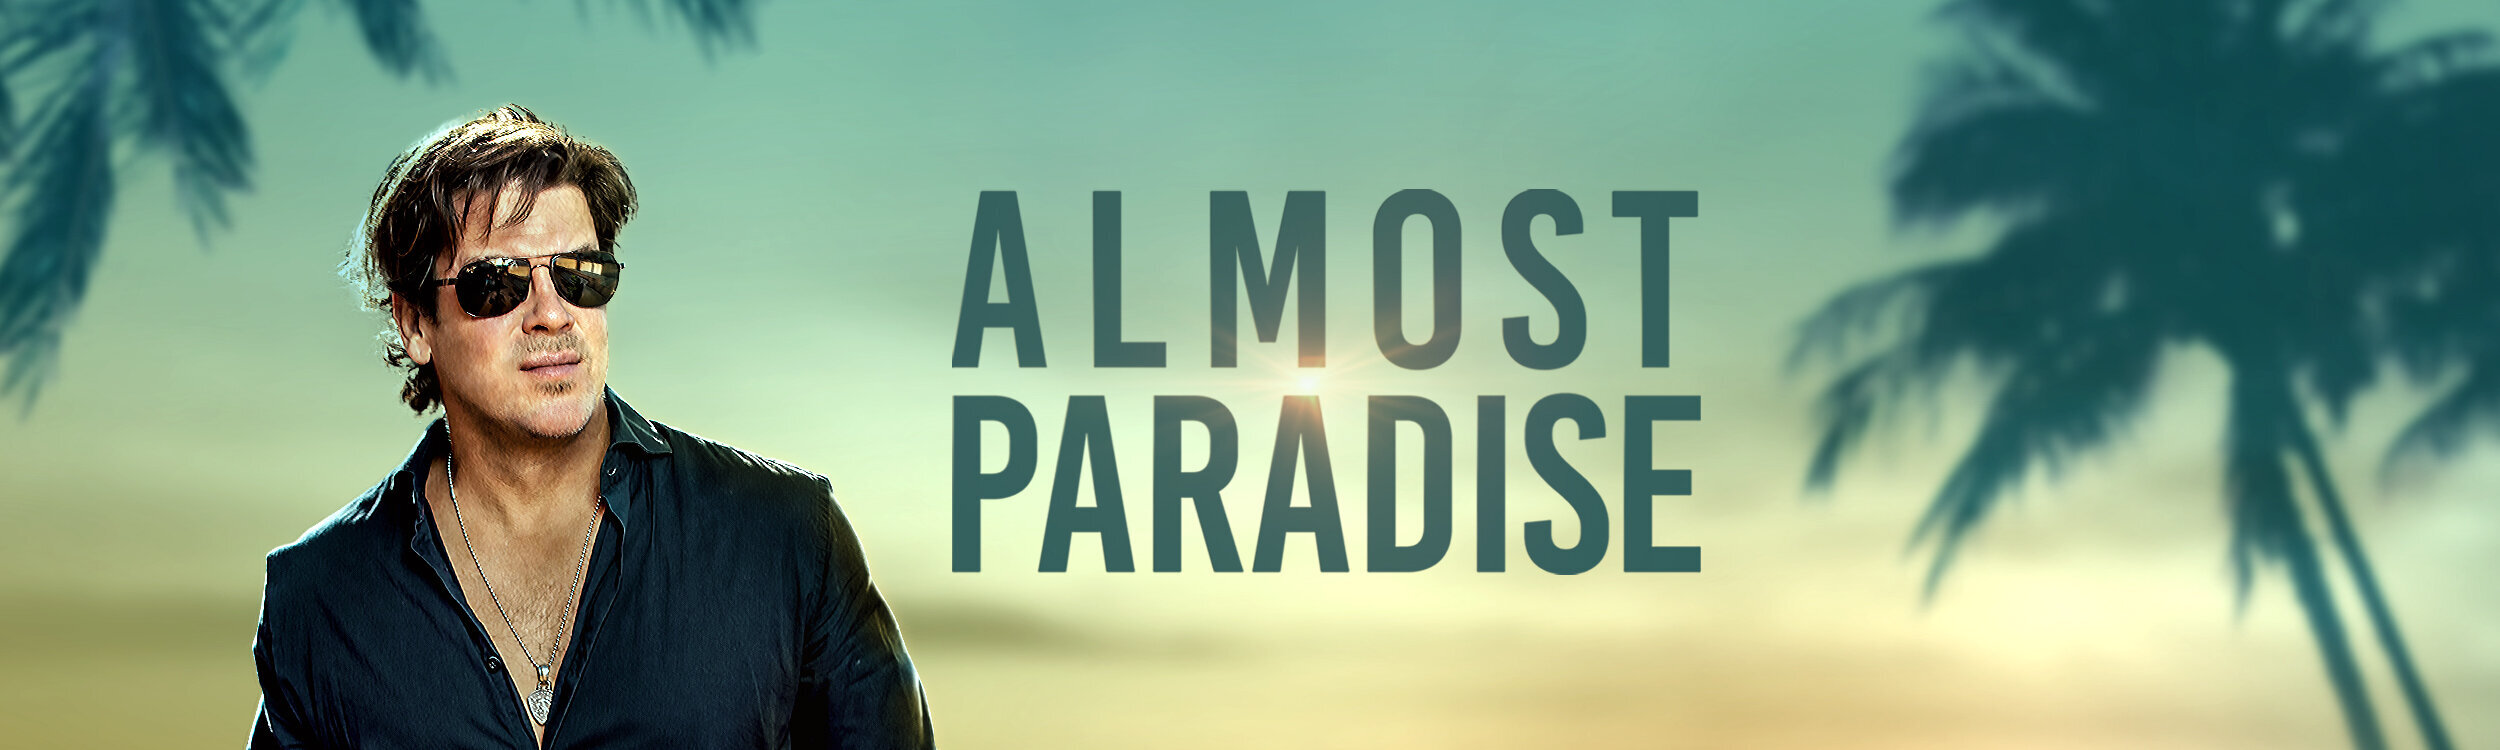 Almost-Paradise-2500x750-Banner-A.jpg